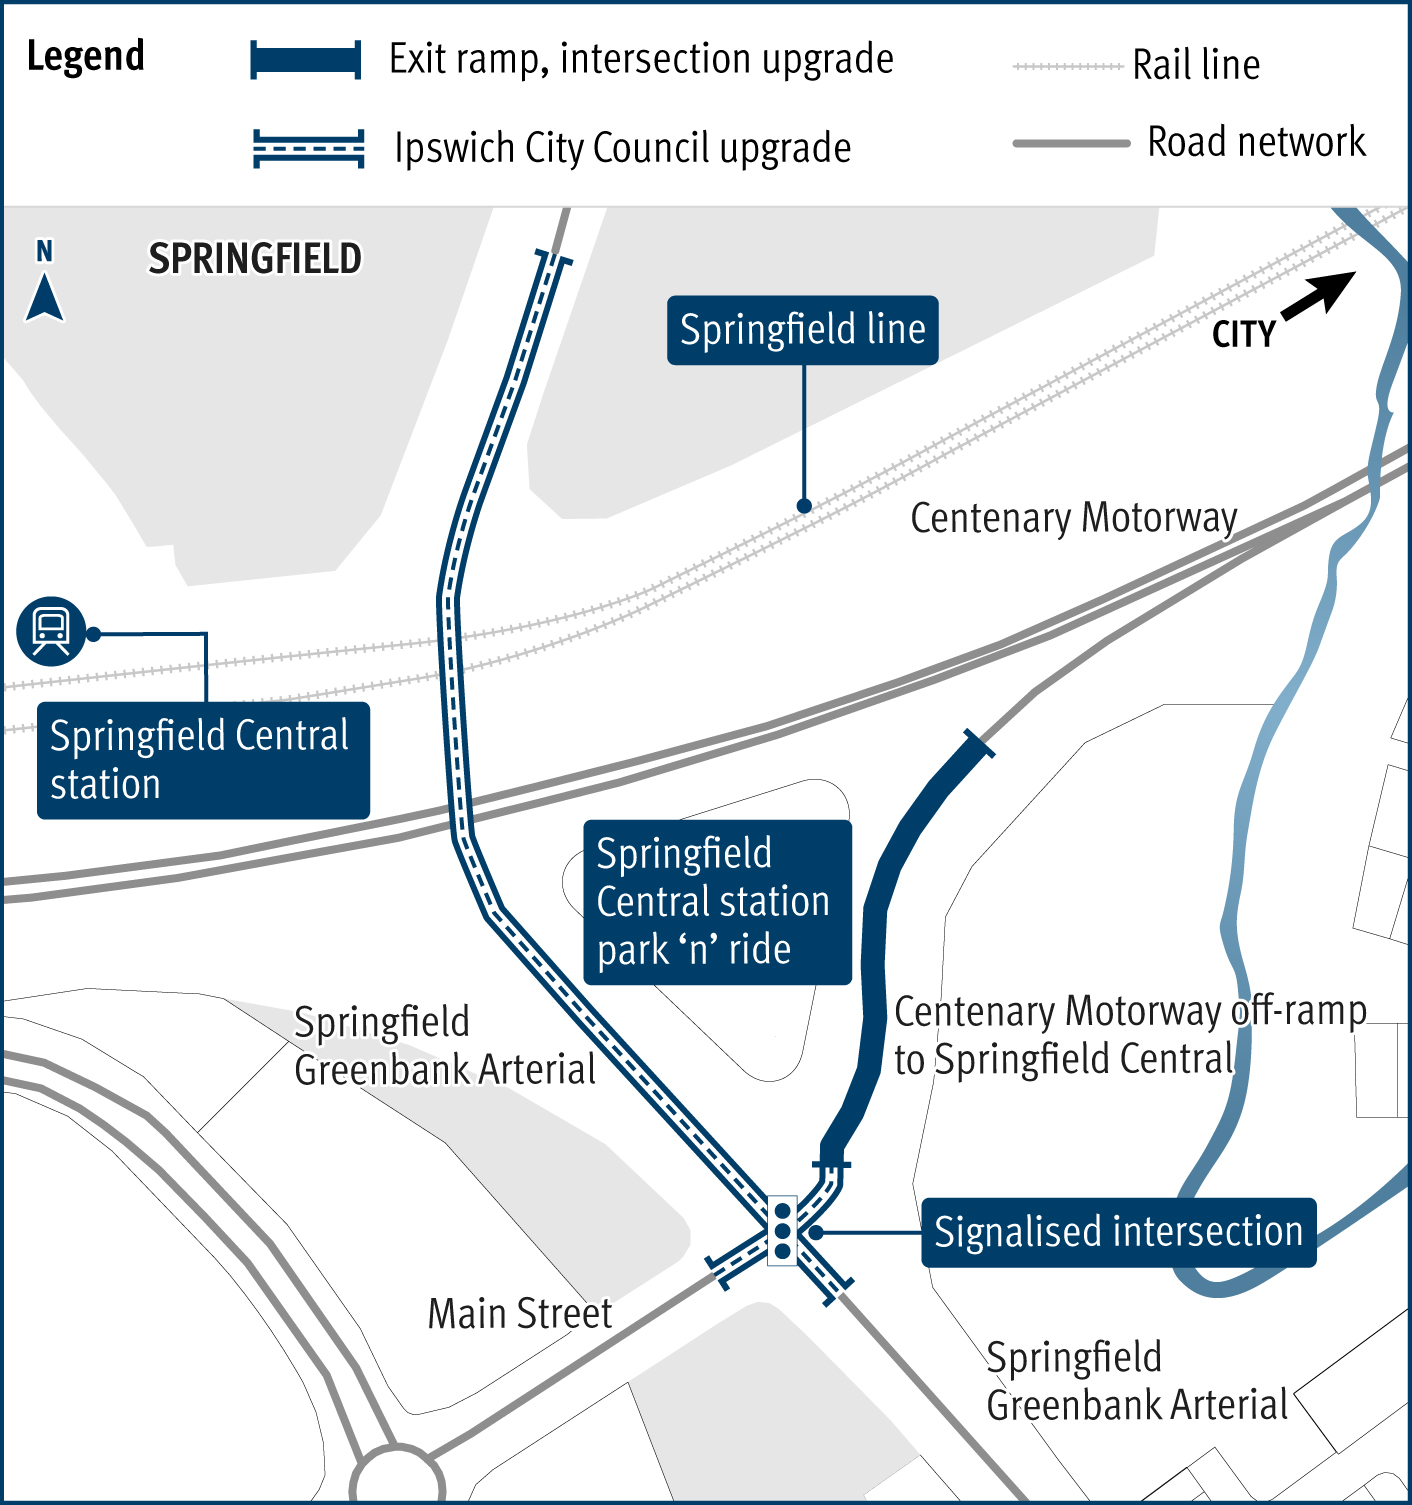 A map showing the Centenary Motorway exit ramp (Exit 32) that will be upgraded, as well as the Main Street and Springfield Greenbank Arterial intersection which will be signalised. A traffic signal icon indicates the location of the new signalised intersection. Springfield Central station, the Springfield Central station park 'n' ride, and the Springfield train line are also visible in close proximity on the map.